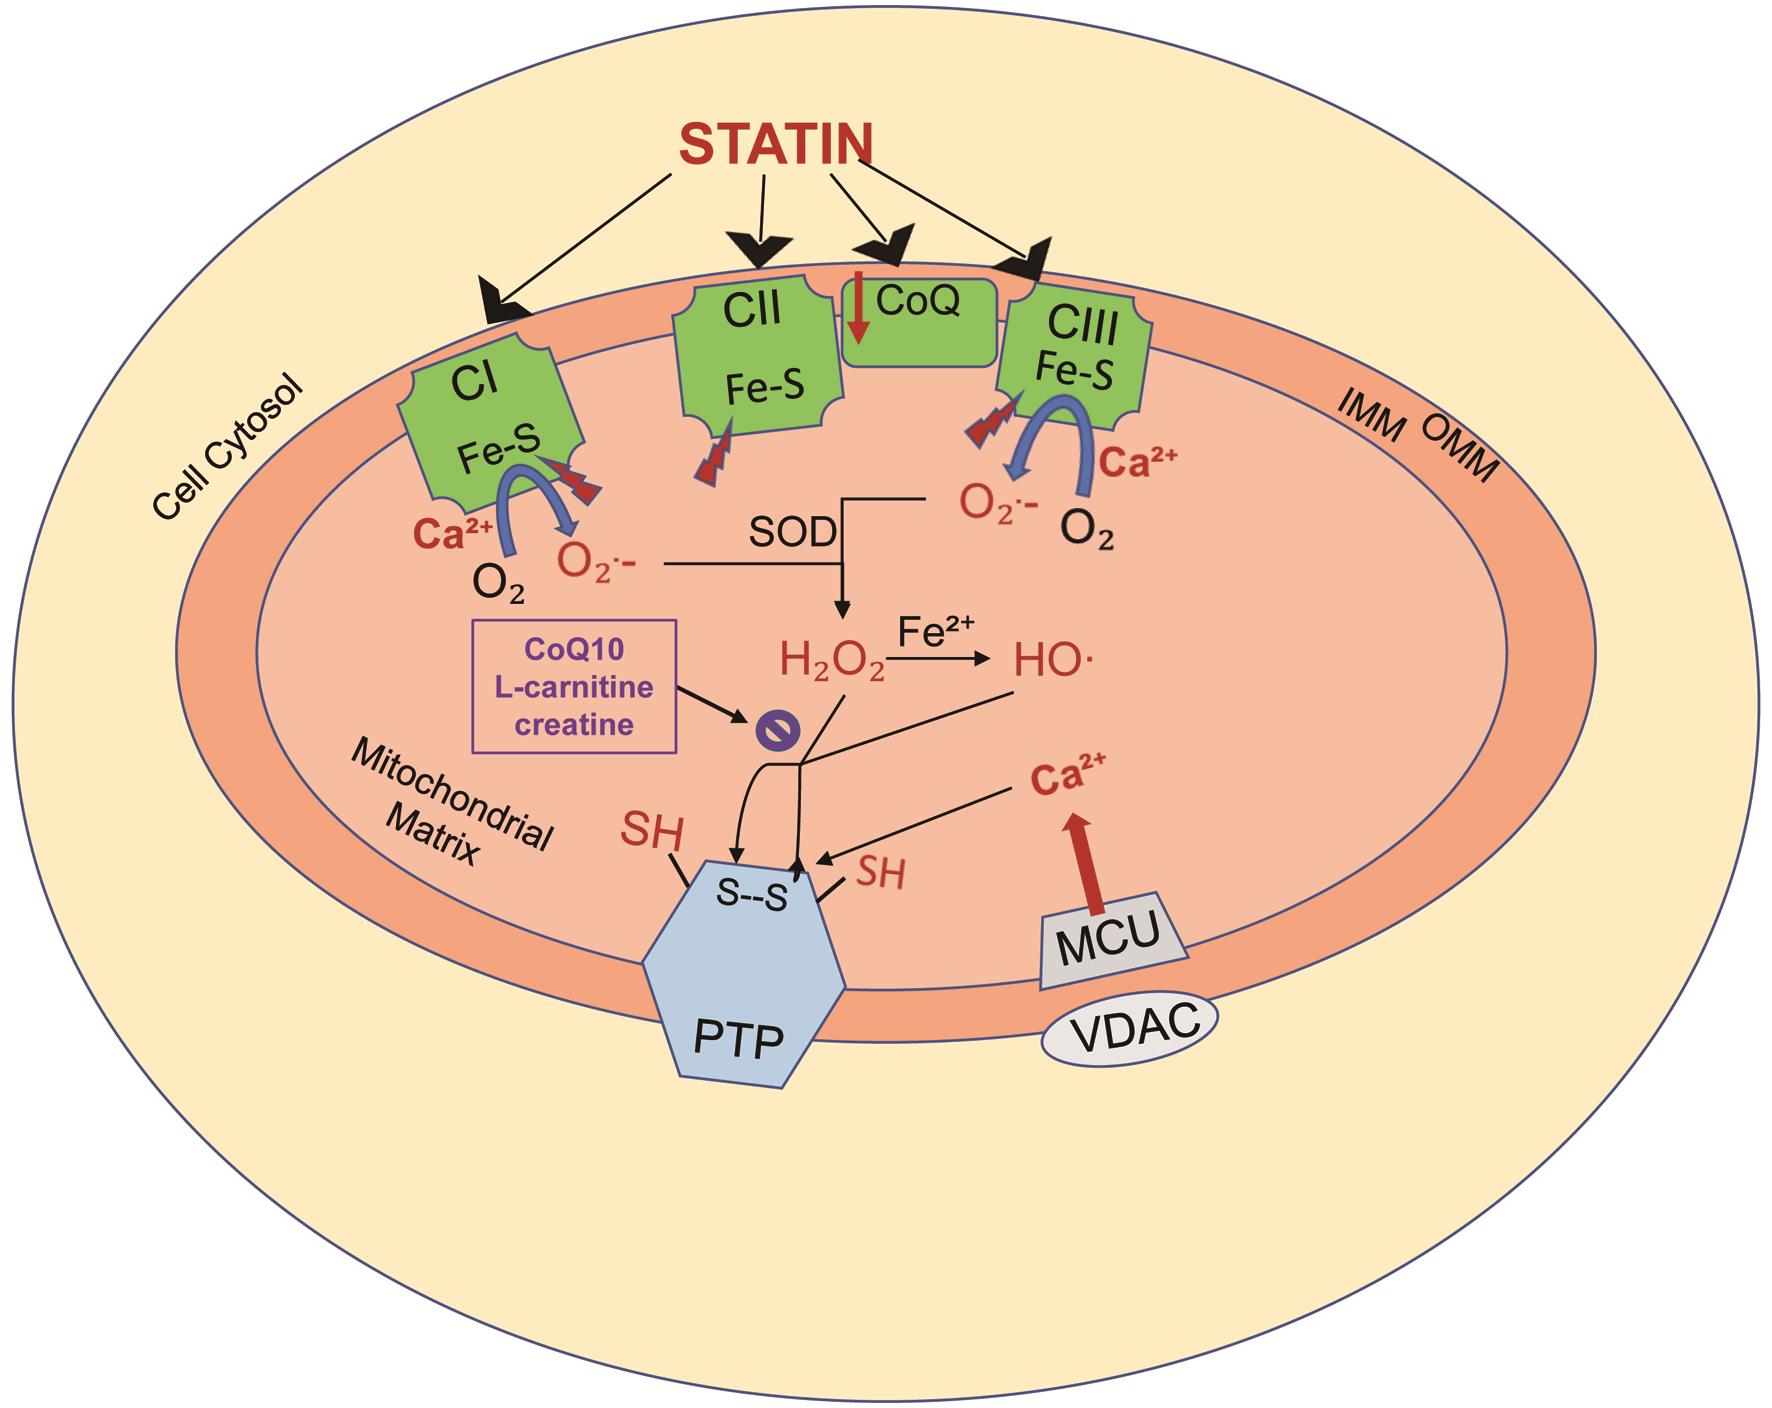 Statin-induced mitochondrial oxidative stress.